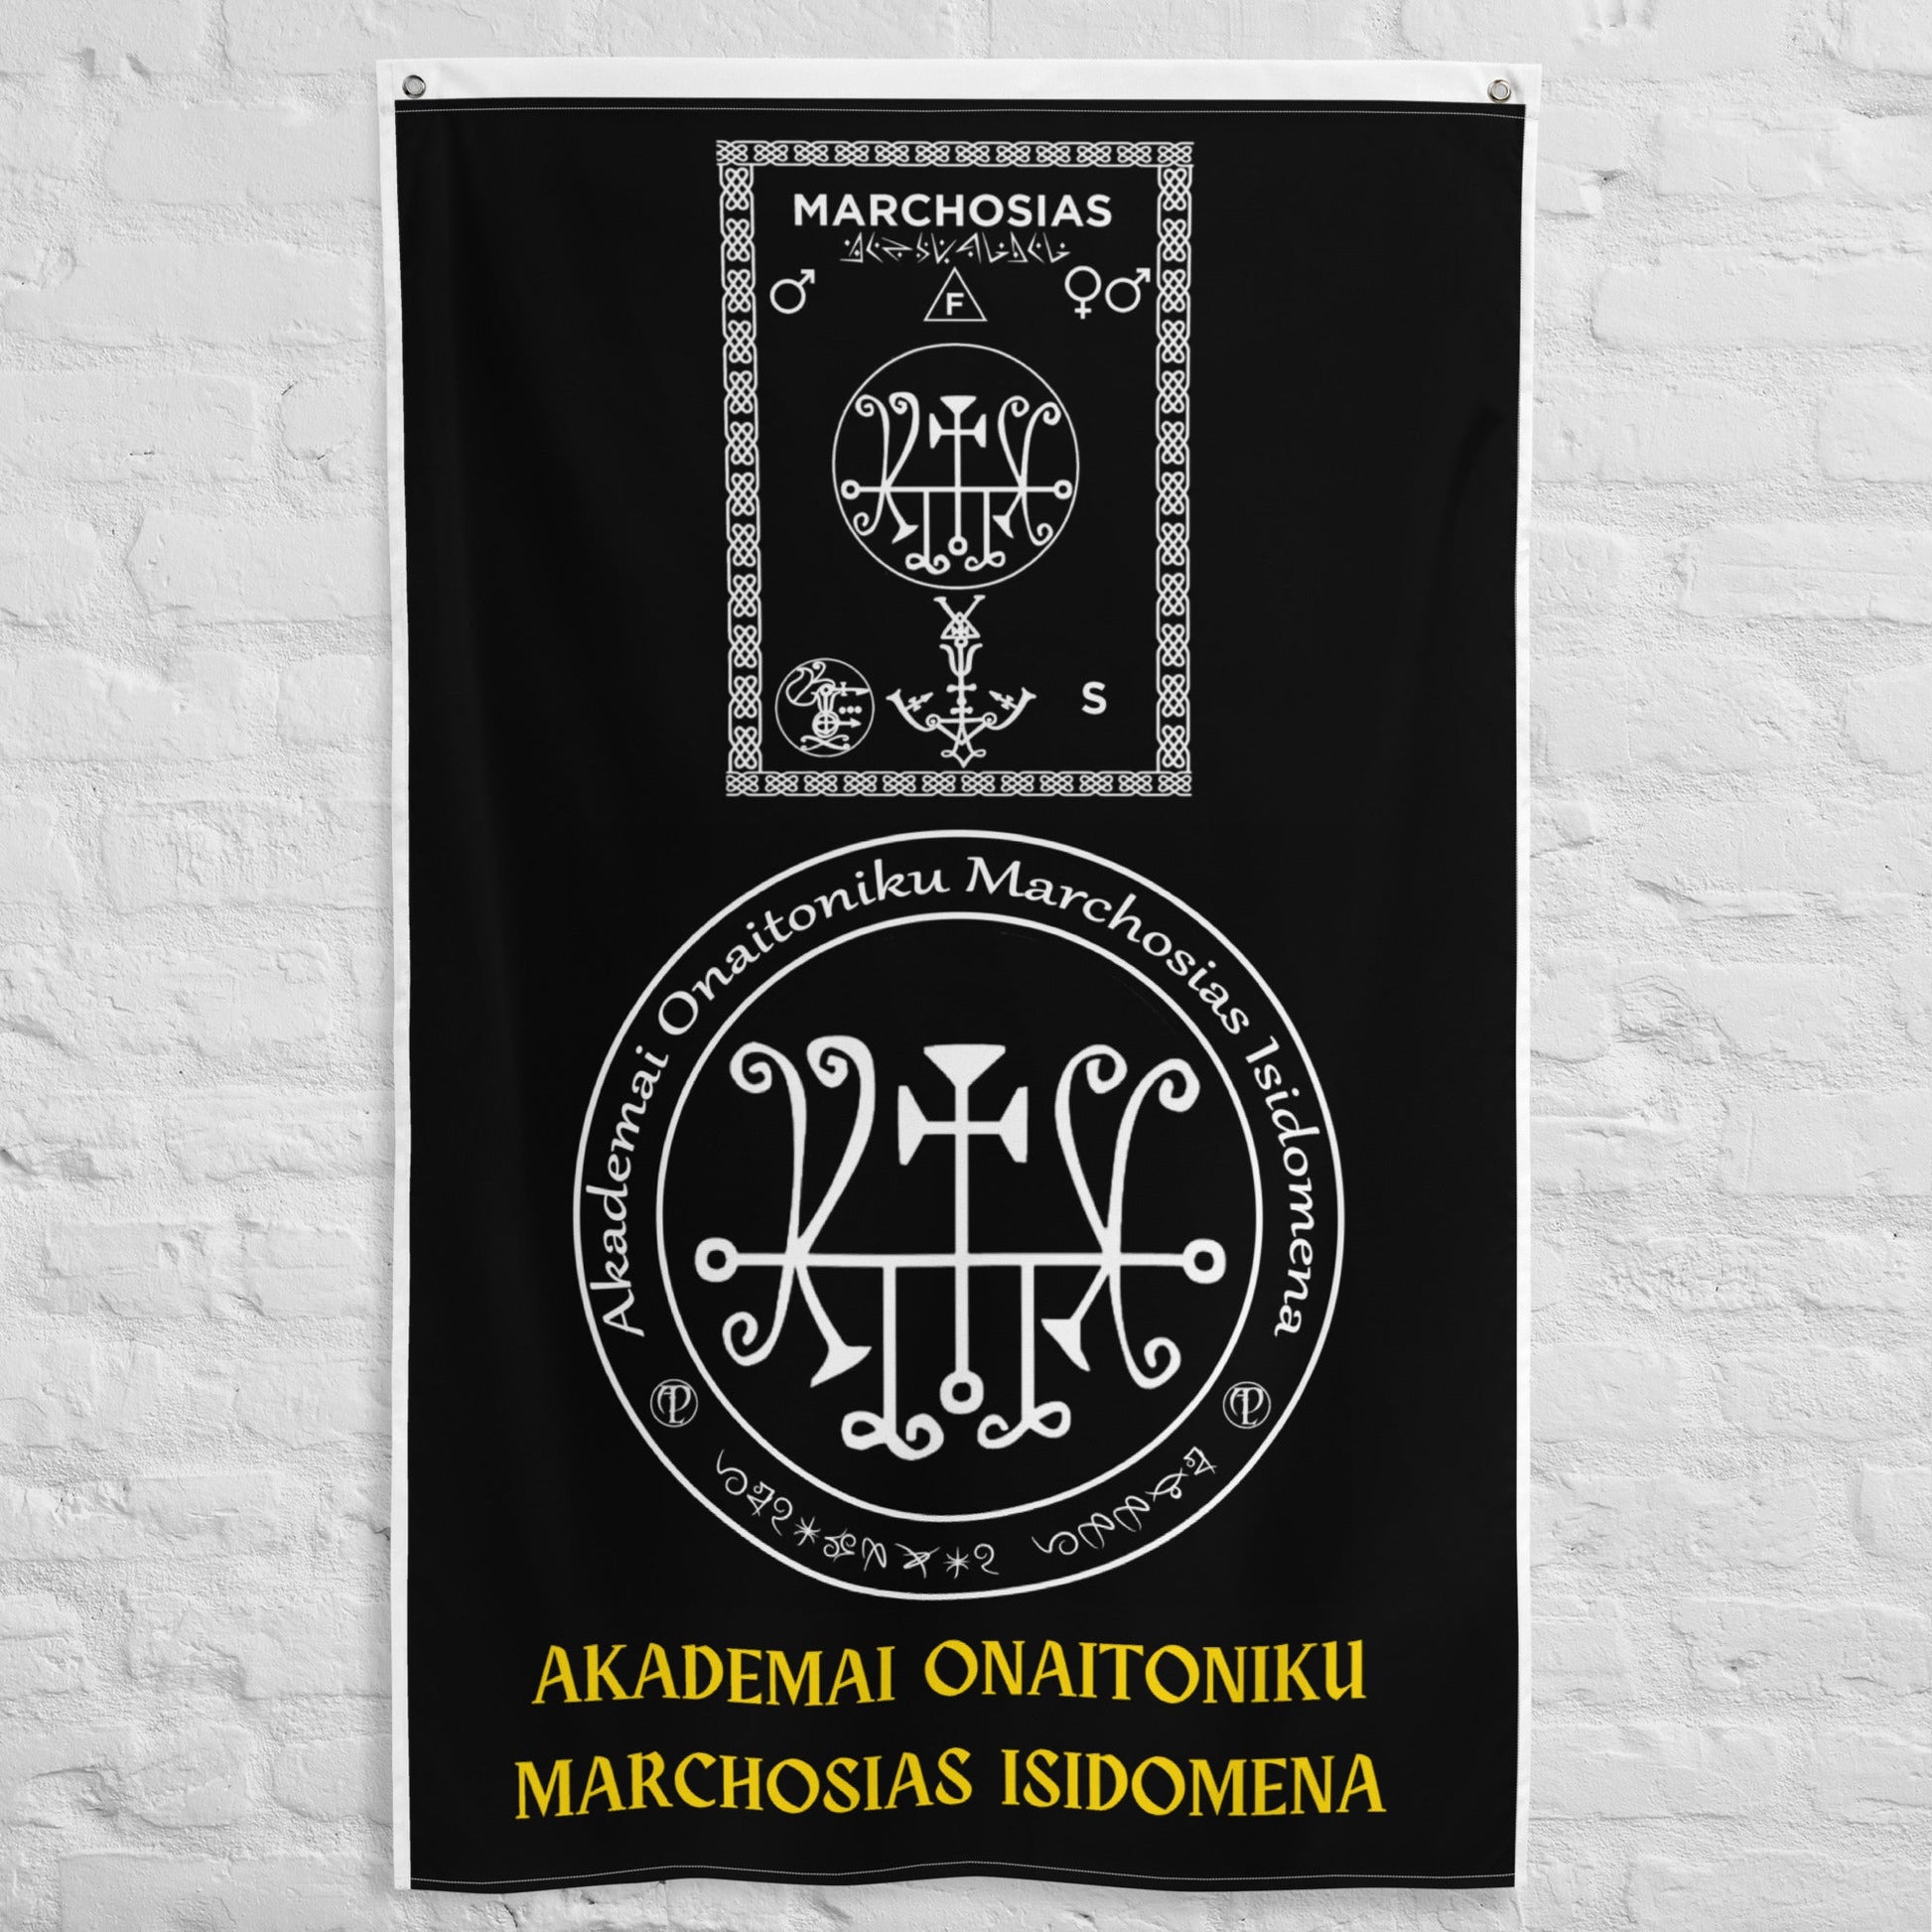 Attunement-Invocation-Flag-of-Spirit-Marchosias-To-make-your-attunements-and-invocations-easy-and-fast